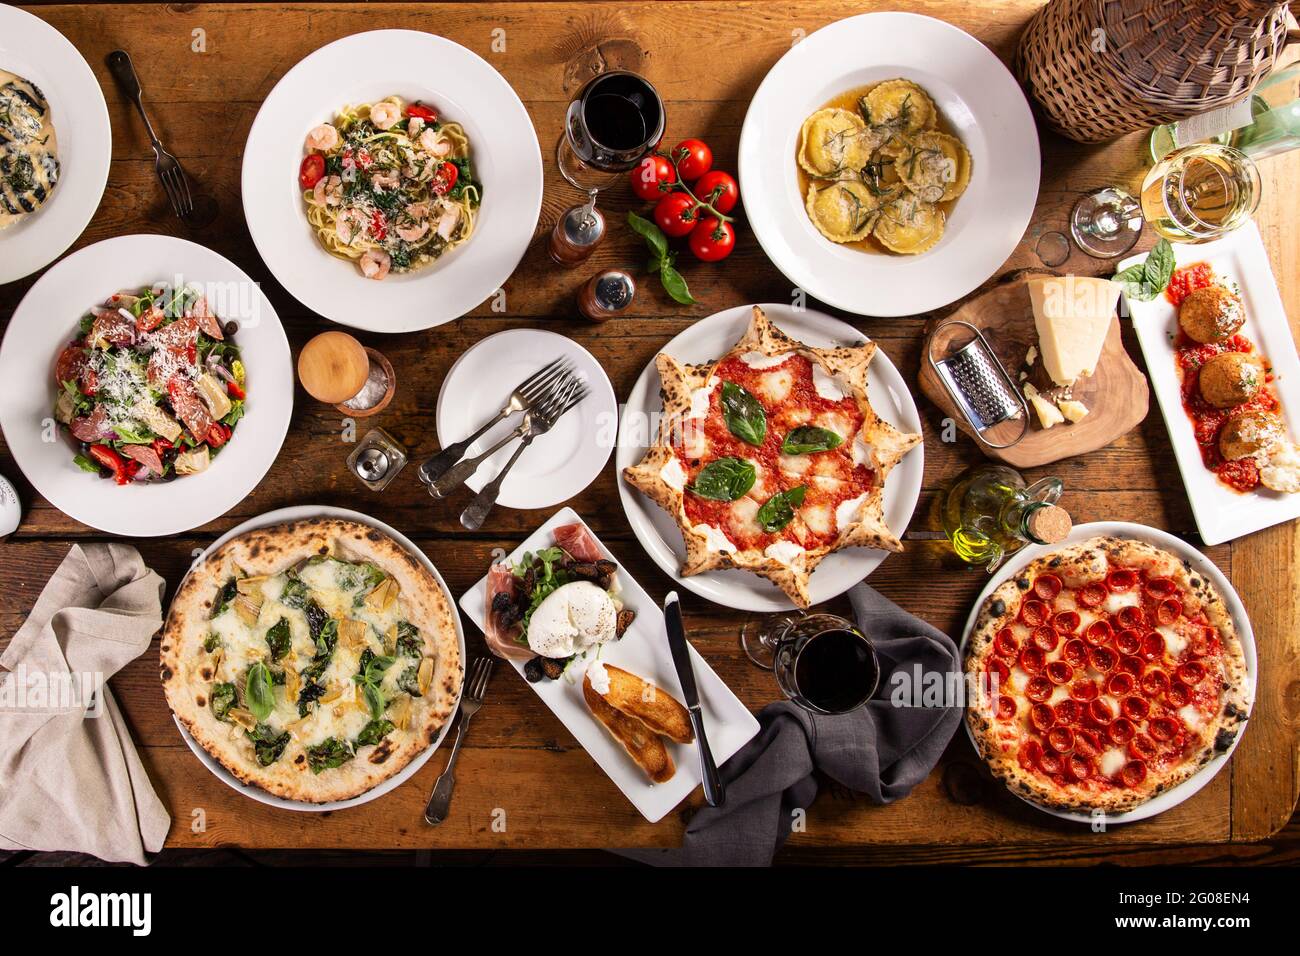 Big dinner table with italian food, pizzas and pastas Stock Photo